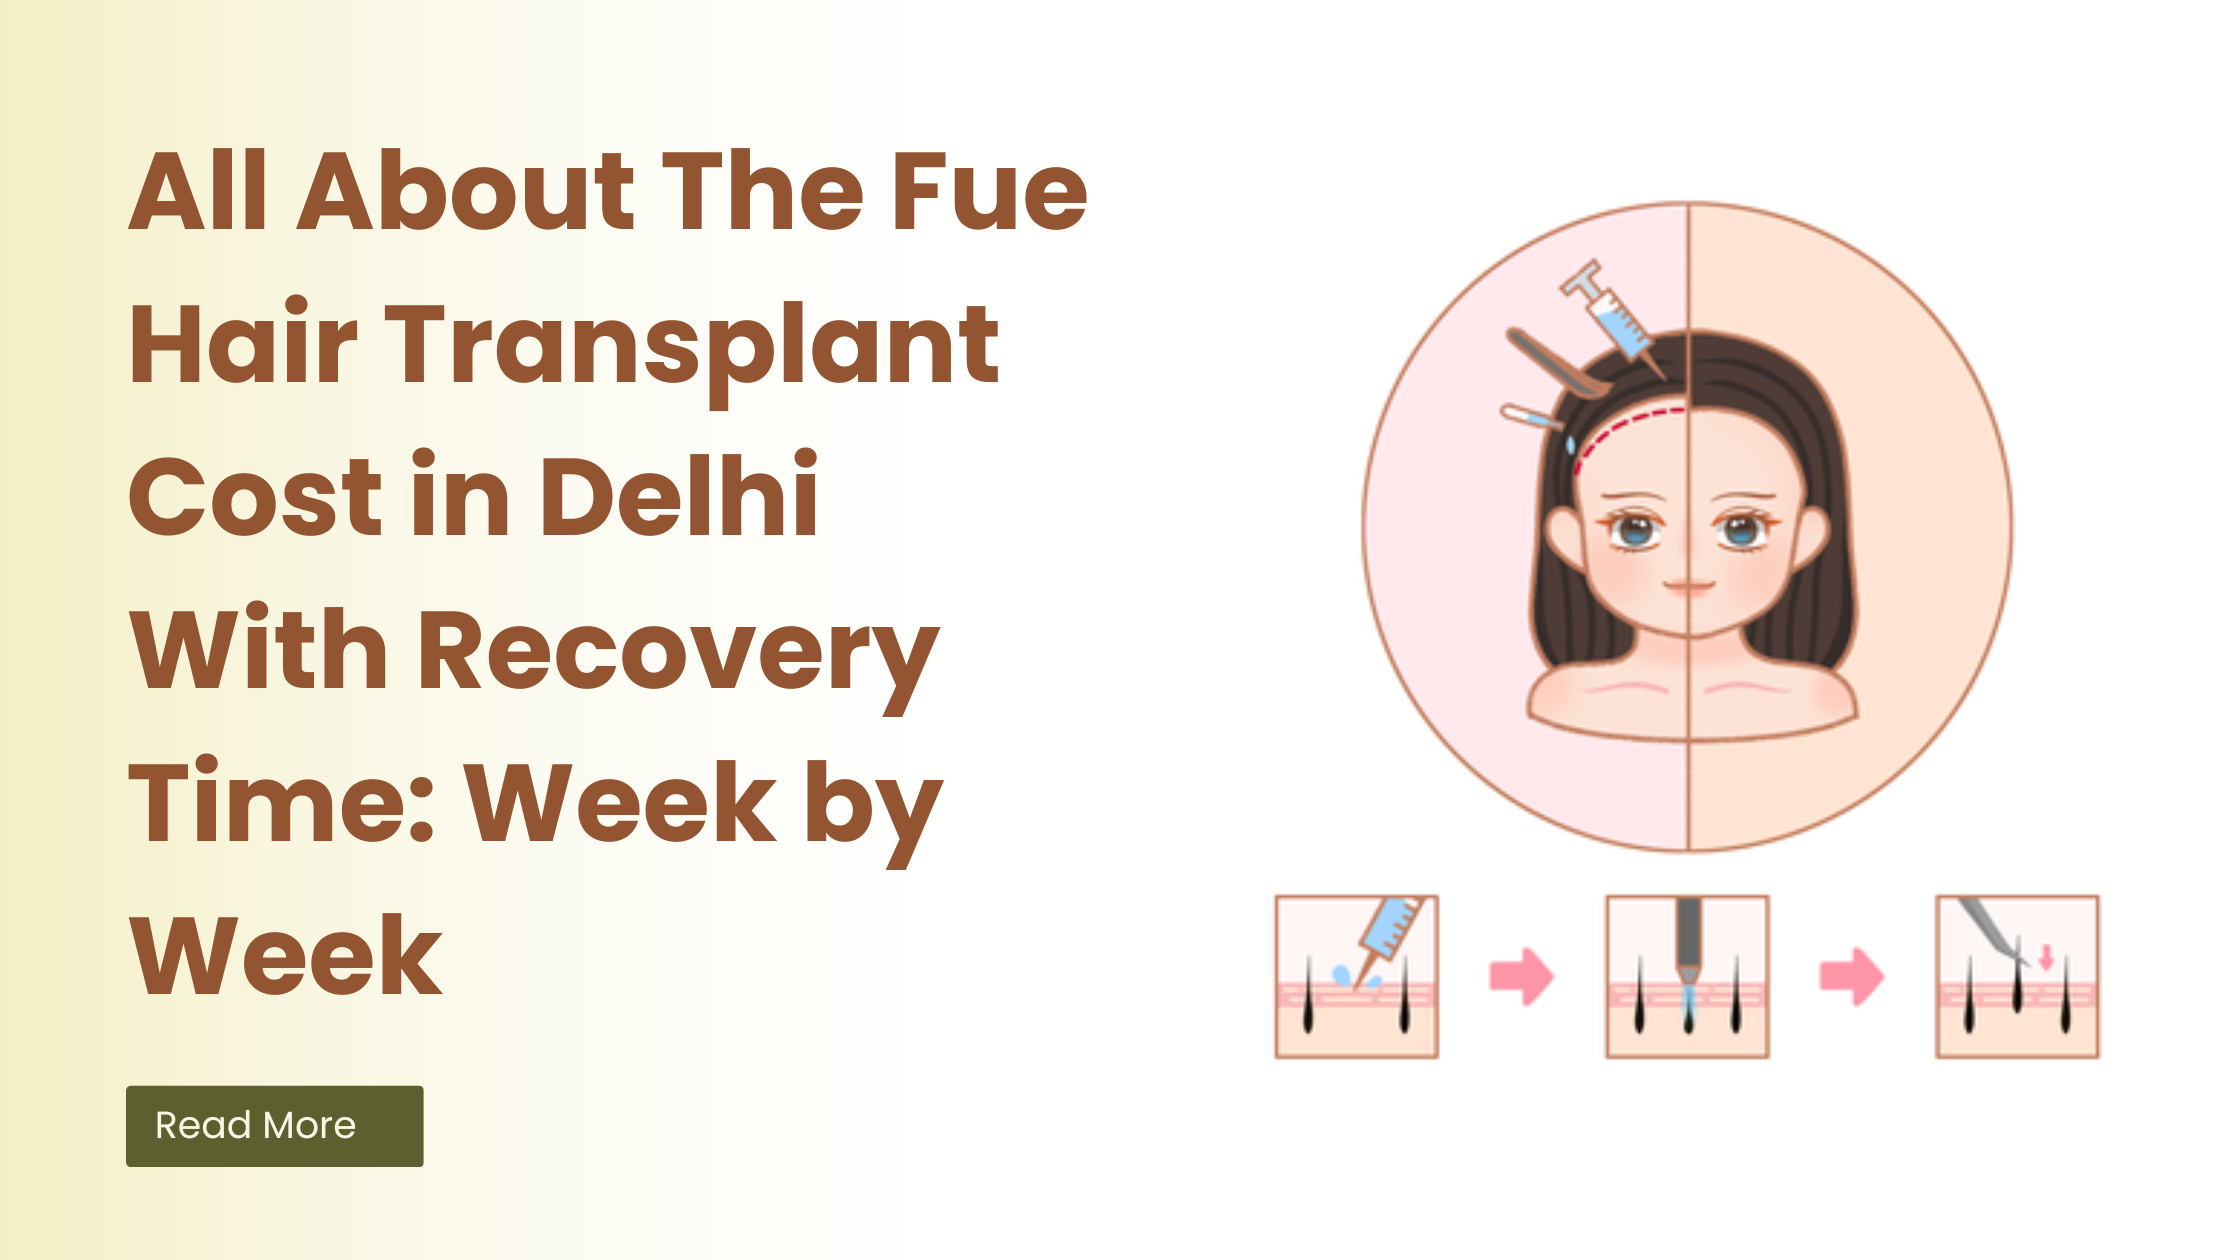 All About The Fue Hair Transplant Cost in Delhi With Recovery Time Week by Week